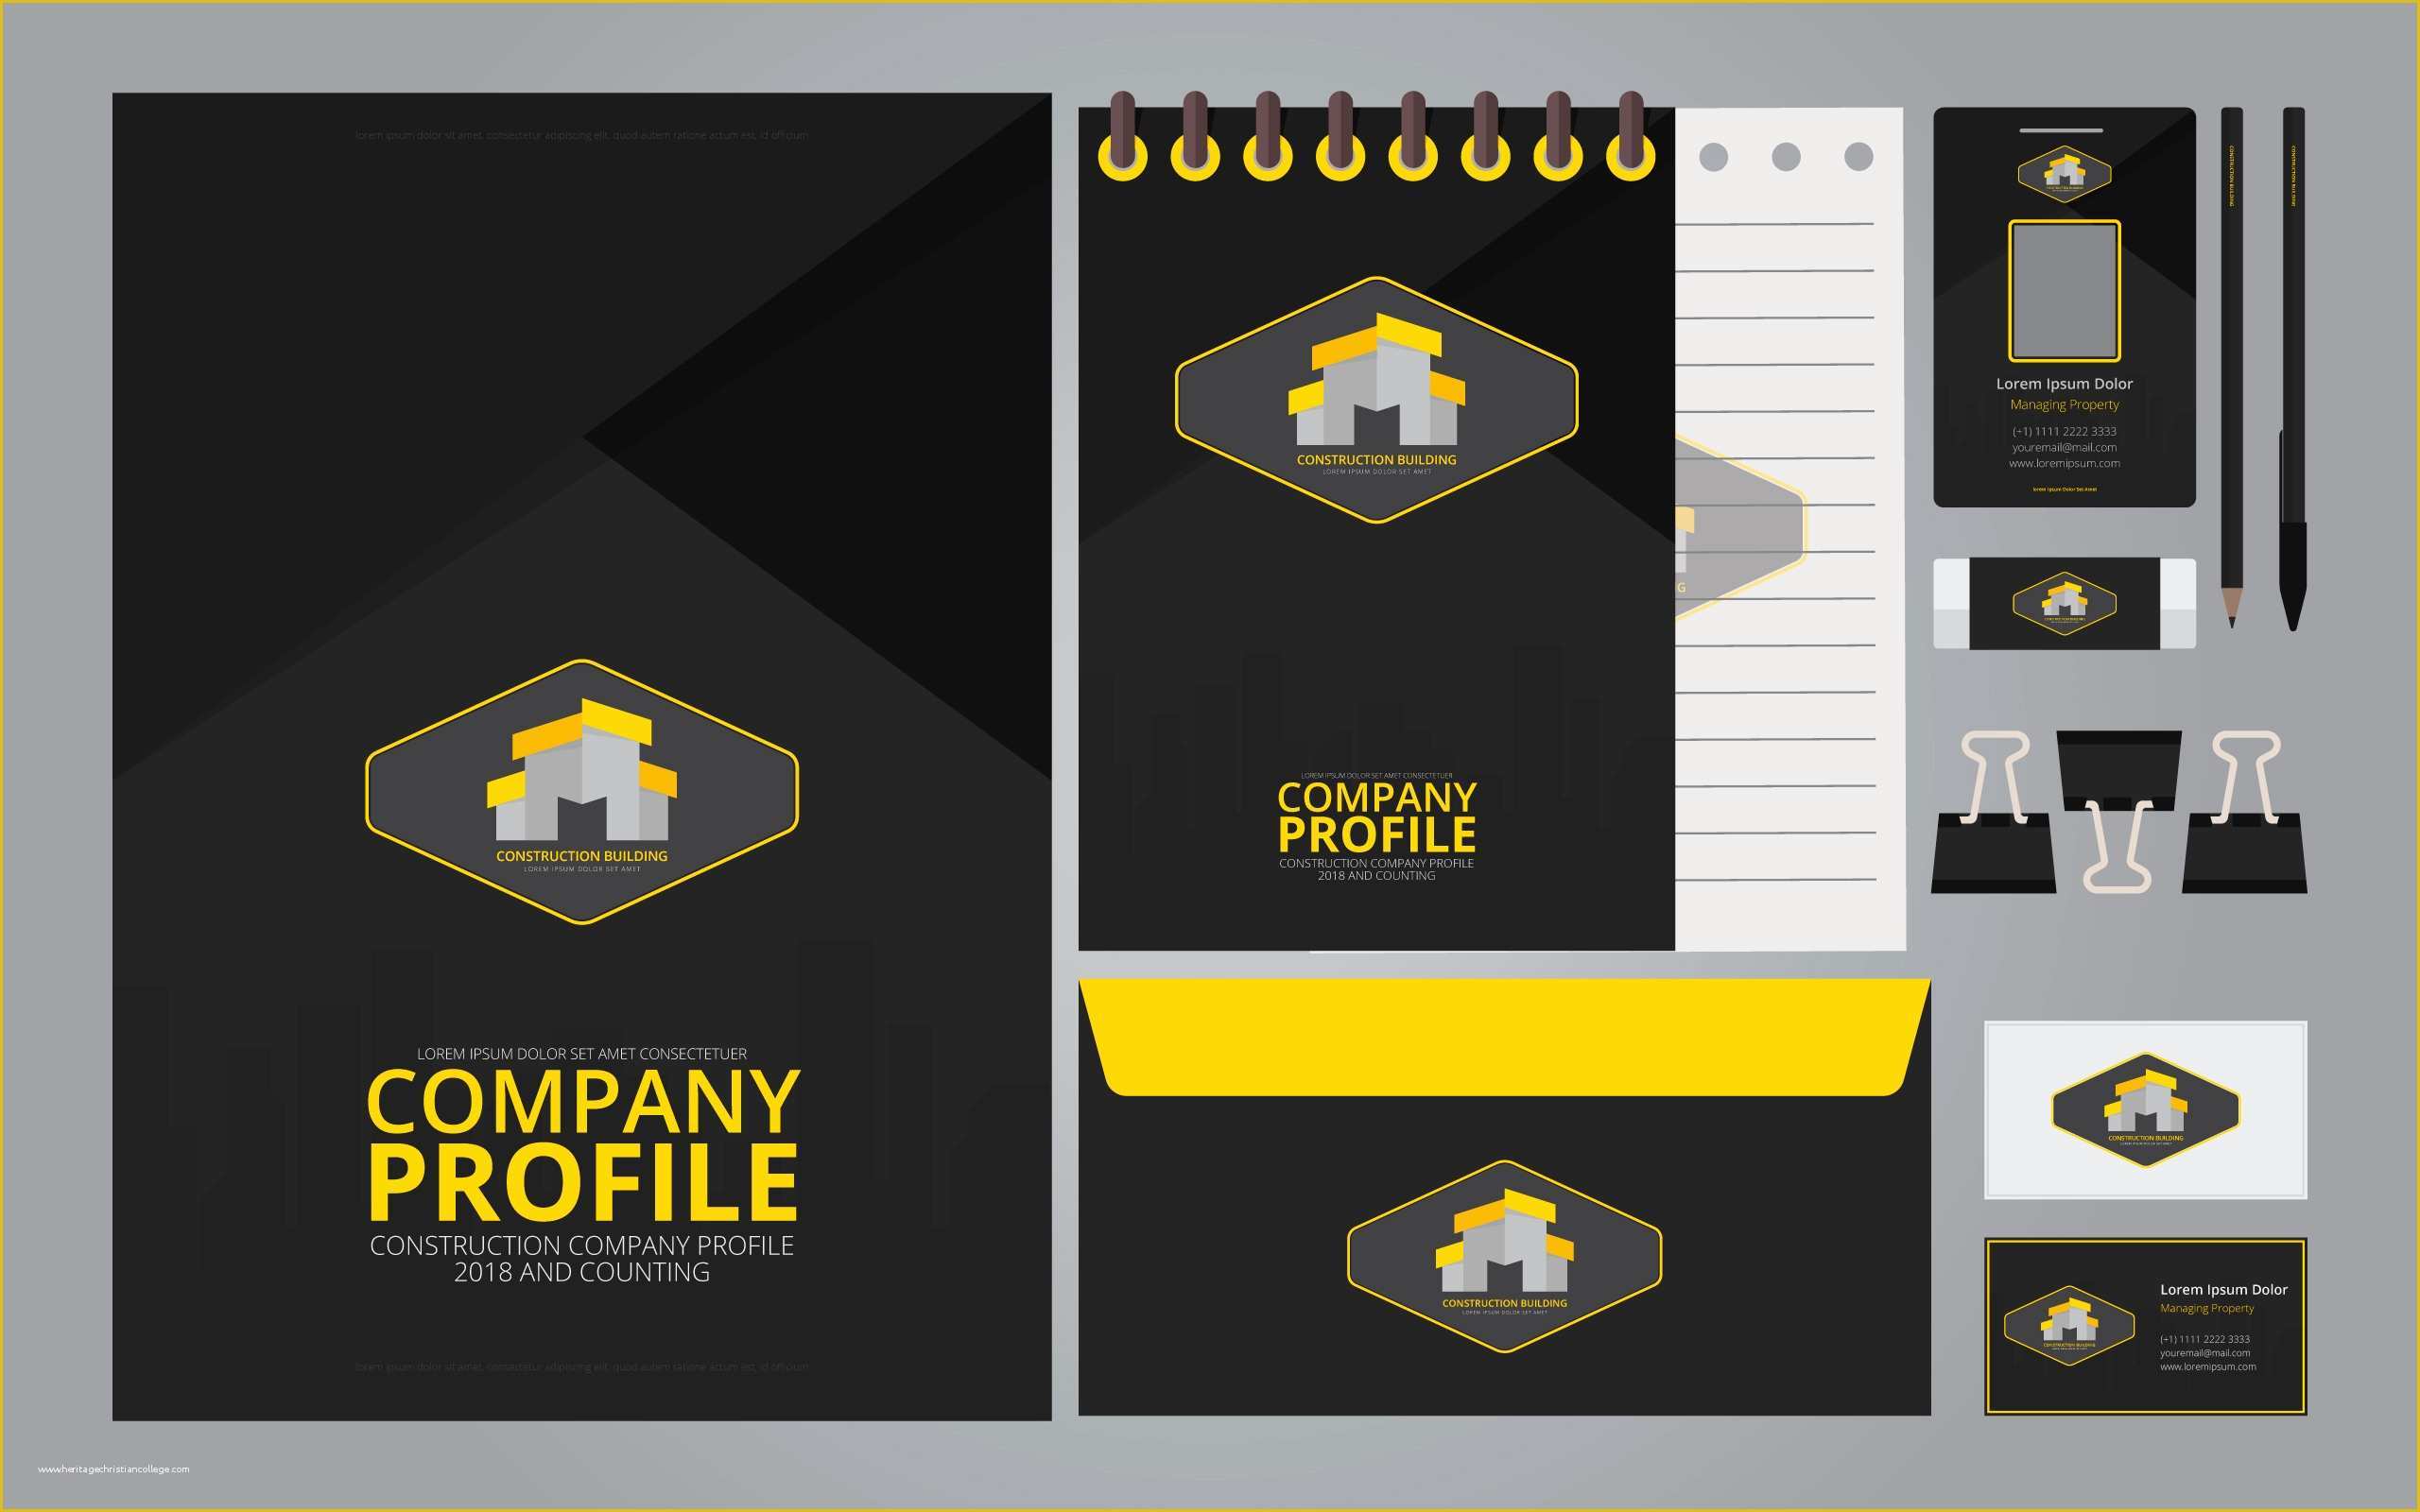 Construction Company Template Free Of Pany Profile Design 3271 Free Downloads